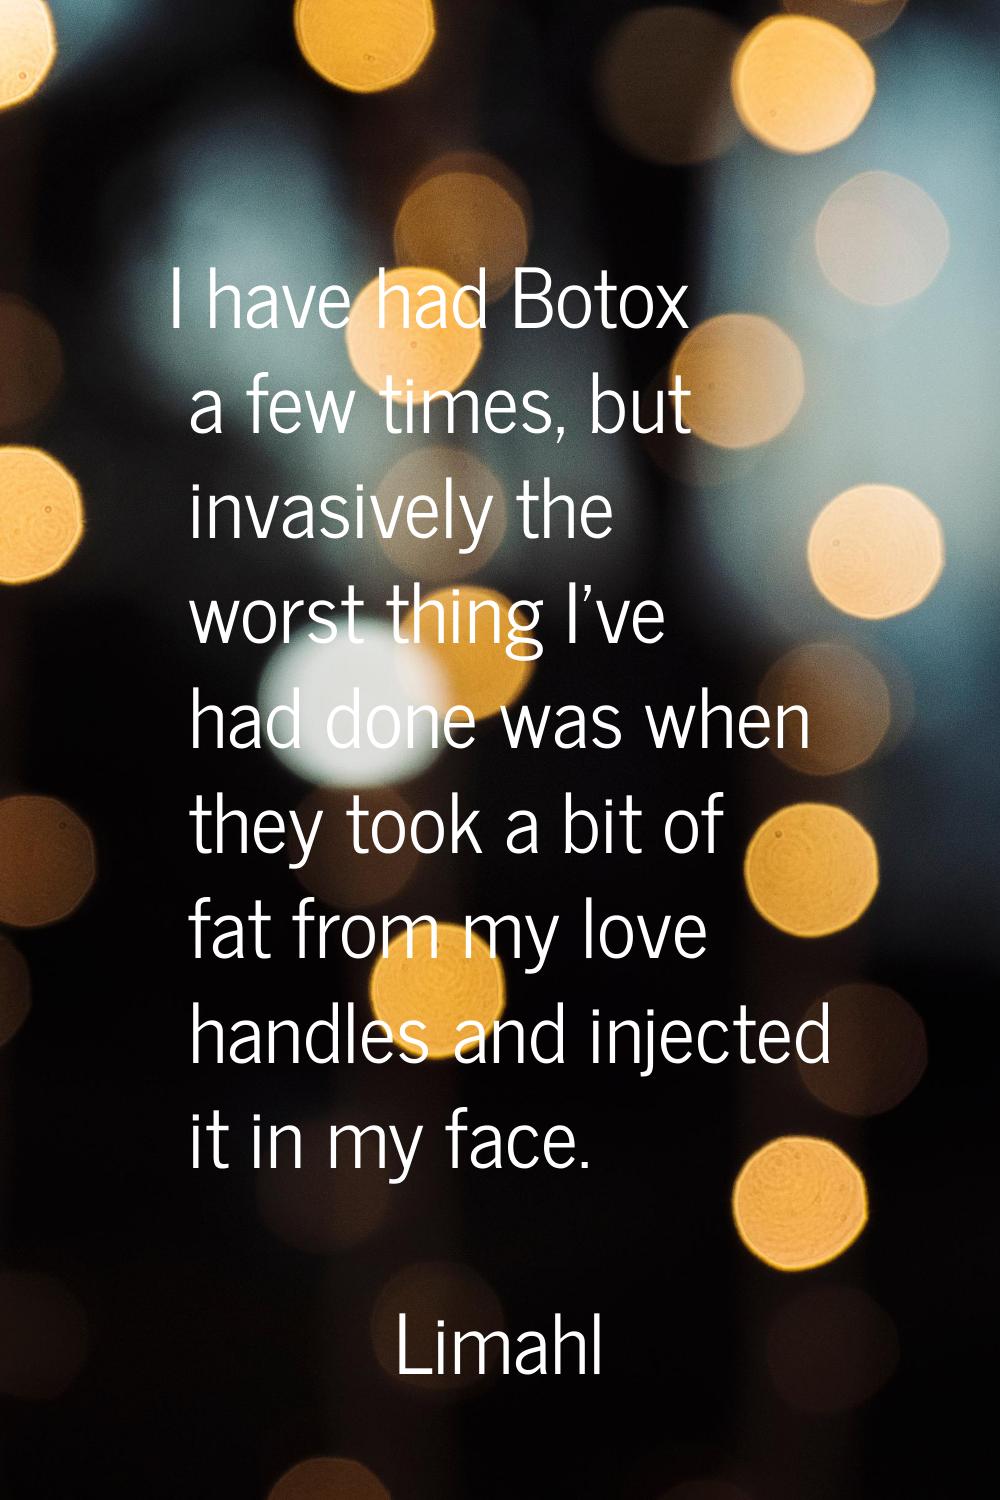 I have had Botox a few times, but invasively the worst thing I've had done was when they took a bit